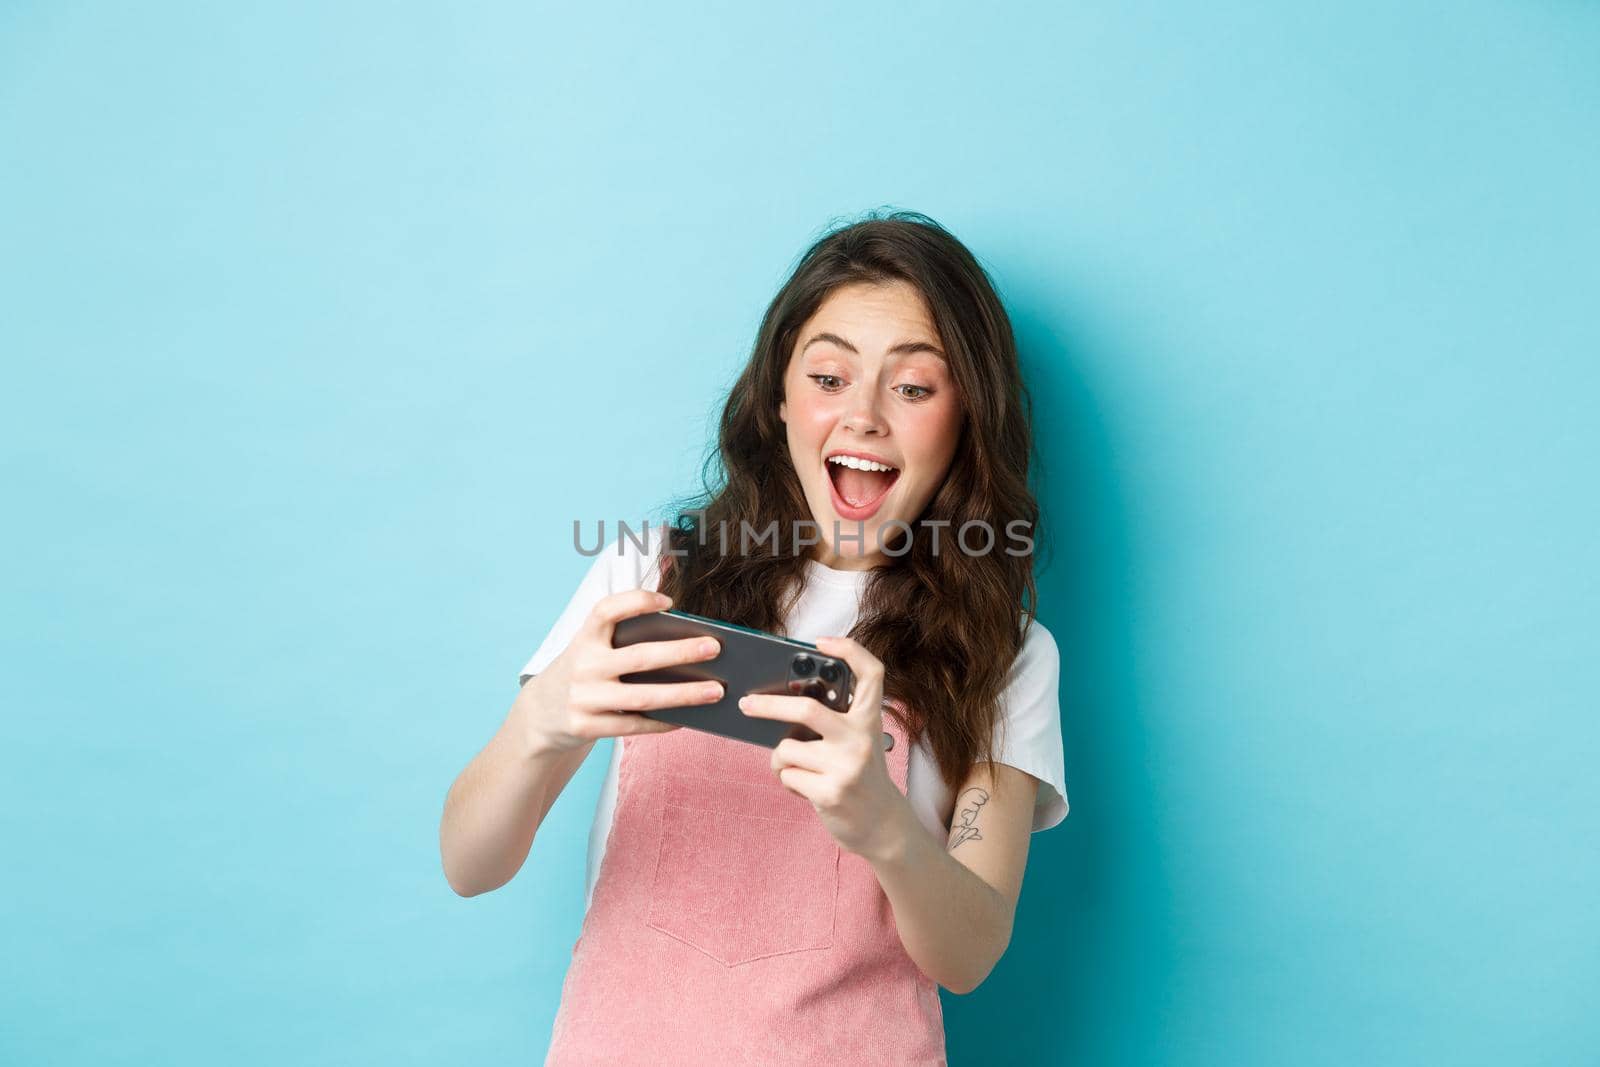 Portrait of excited young woman playing mobile video game with both hands, smiling amused, looking at screen, standing over blue background.